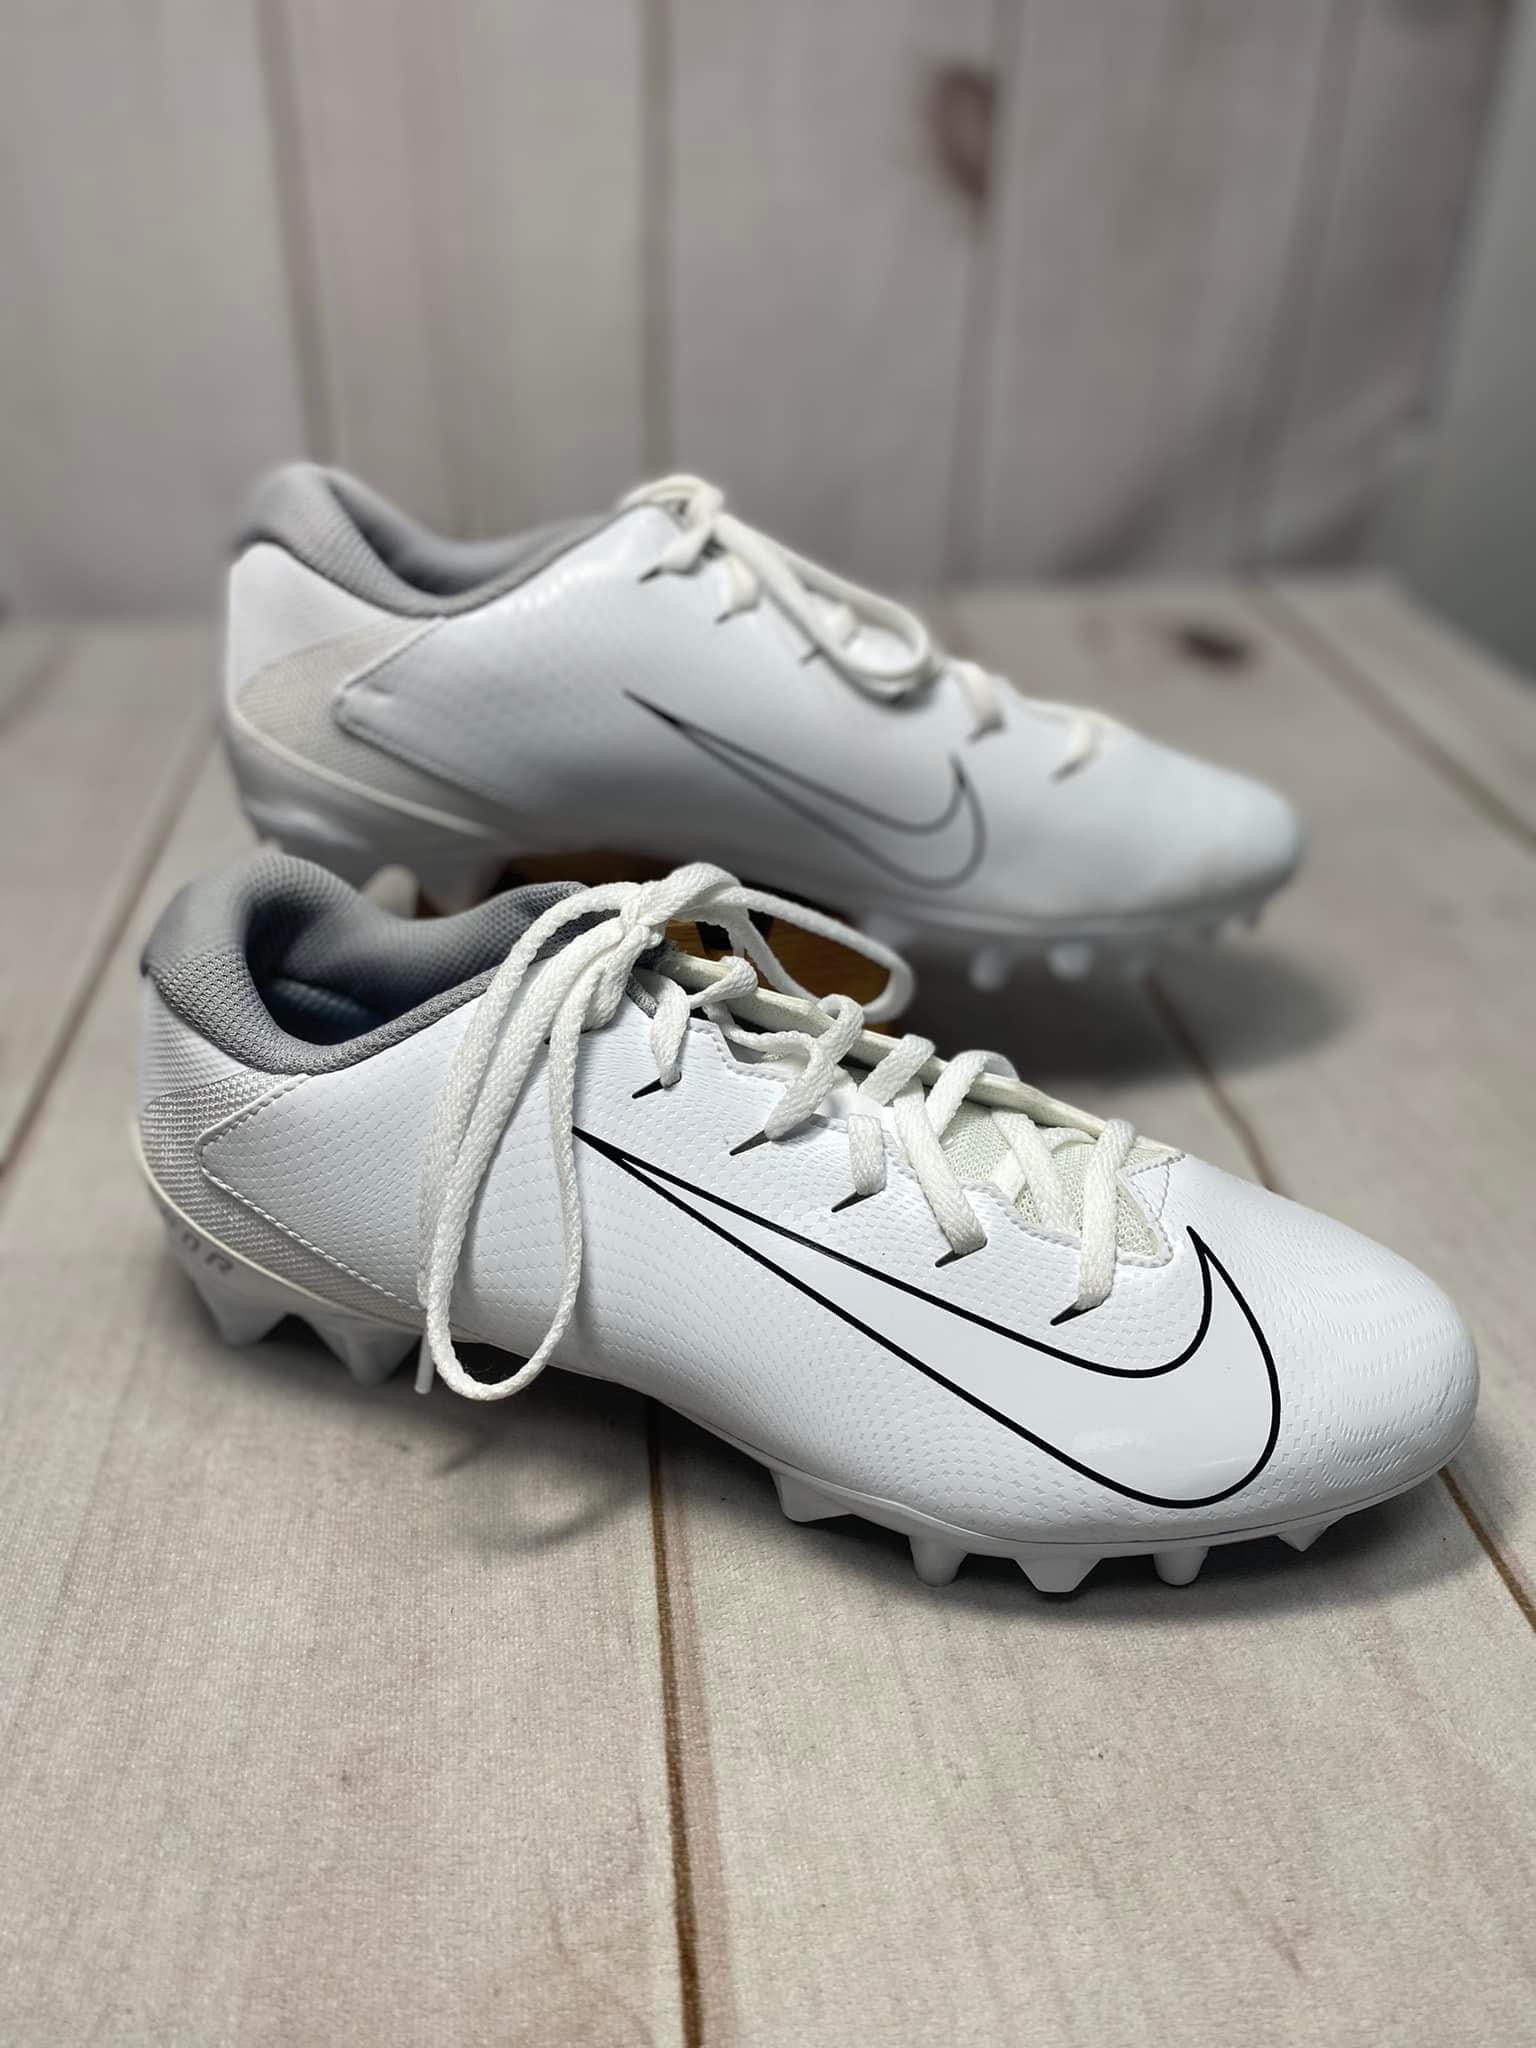 Nike Cleats - New without Box
Vapor White 917167-100
Size: Mens 11